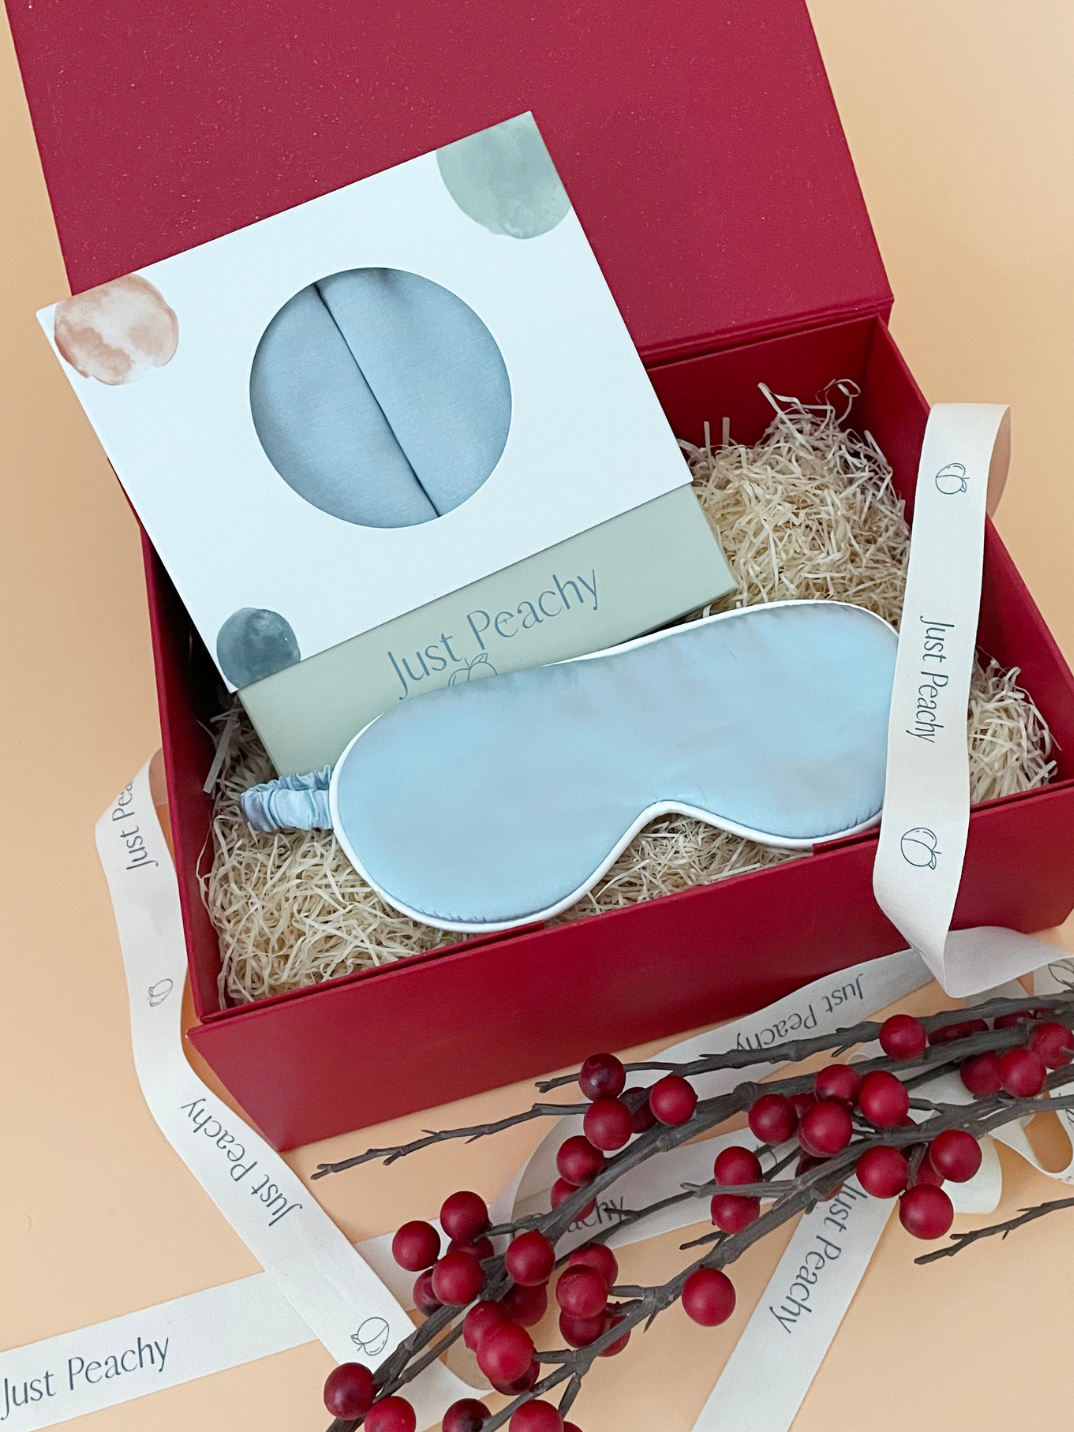 Spoil little ones with Just Peachy Limited Edition Feel Good Sweet Dreams Gift Set curated in collaboration with NakedLab. Available in a choice of Pink or Blue, each set includes Just Peachy TENCEL™ Micro Modal Top & Bottom and a luxurious sleep mask for a peaceful night’s rest. Shop now.